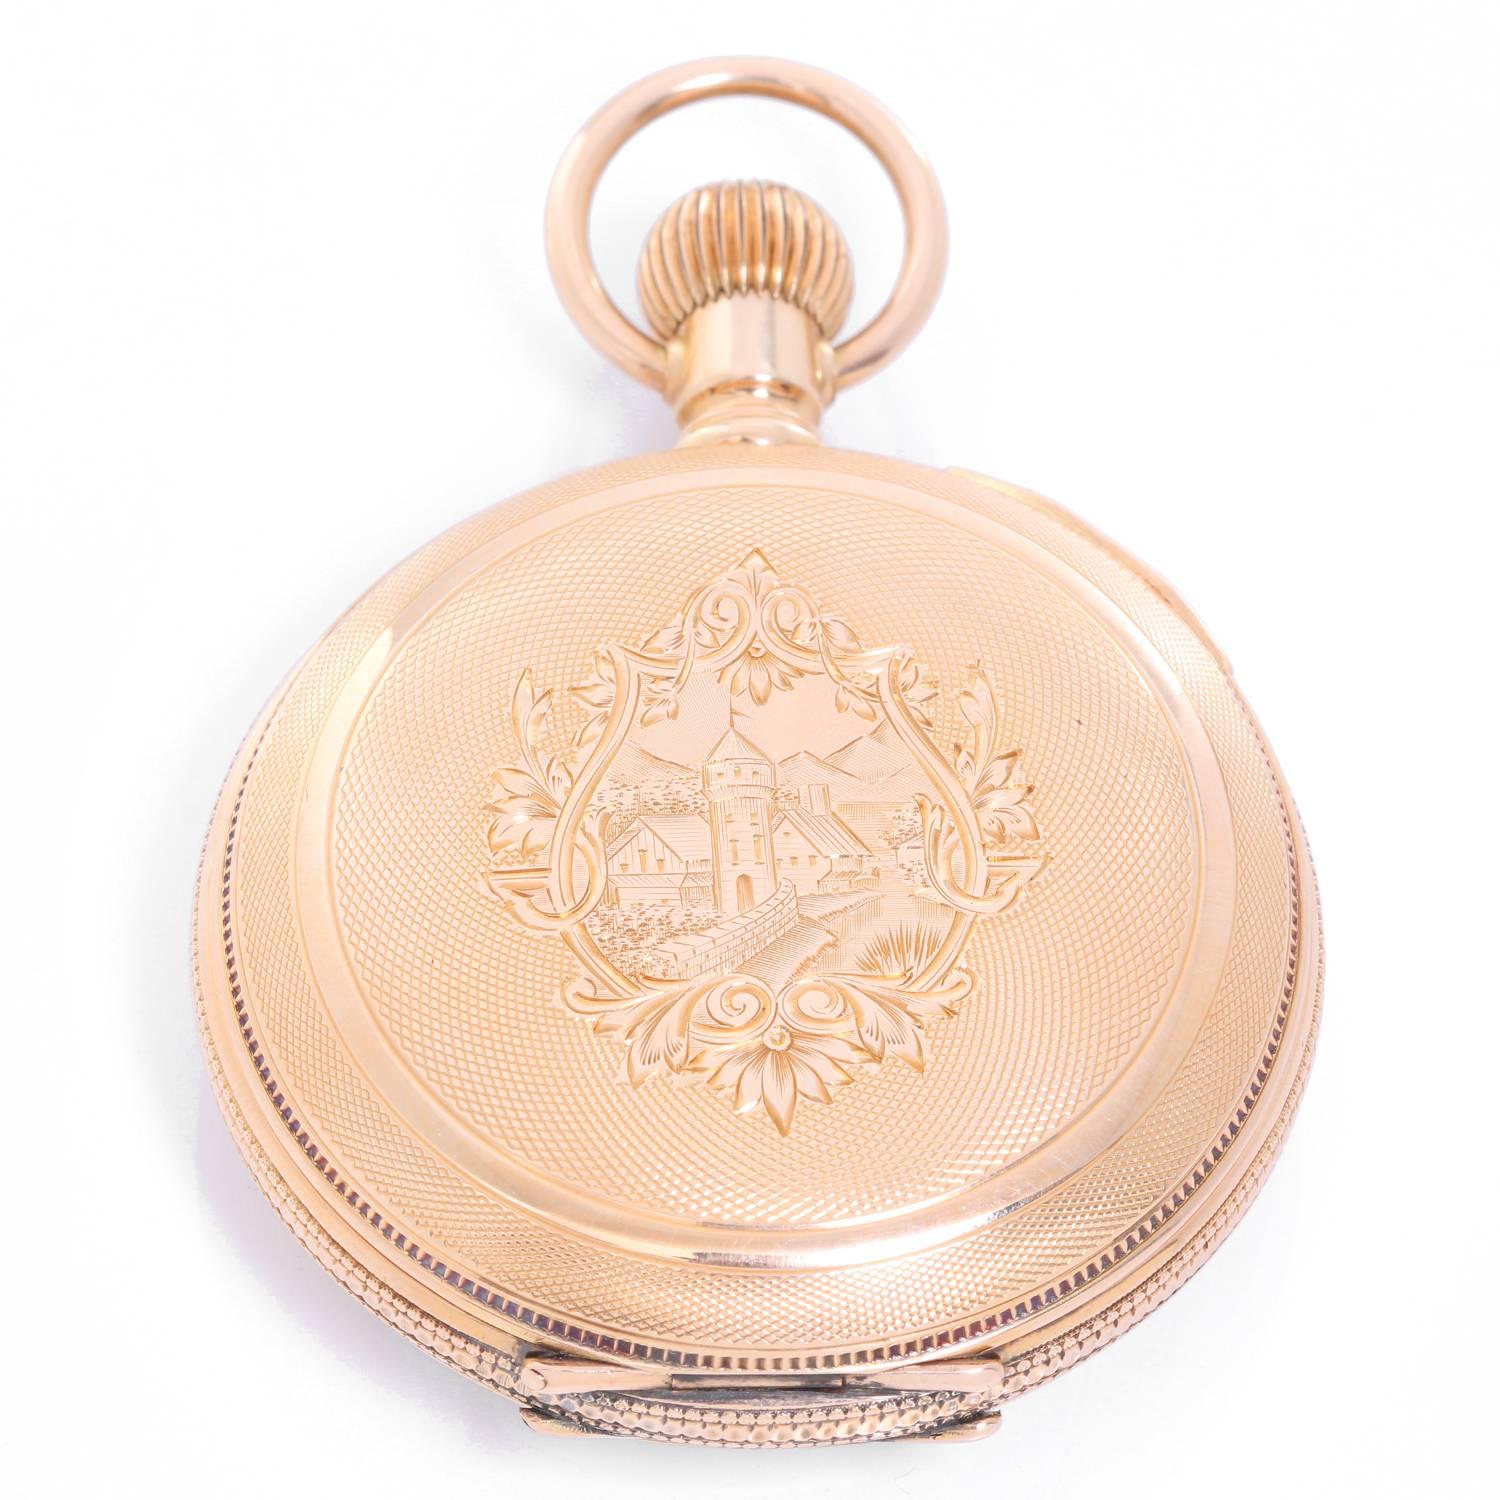 Beautiful example of a never used American Watch Co. Waltham 14K Yellow Gold Pocket Watch -  Manual winding; 15 jewels. Unused 14K Yellow Gold solid case ( 54 mm ). White enamel dial with black Roman numerals; subseconds at 6 o'clock position.